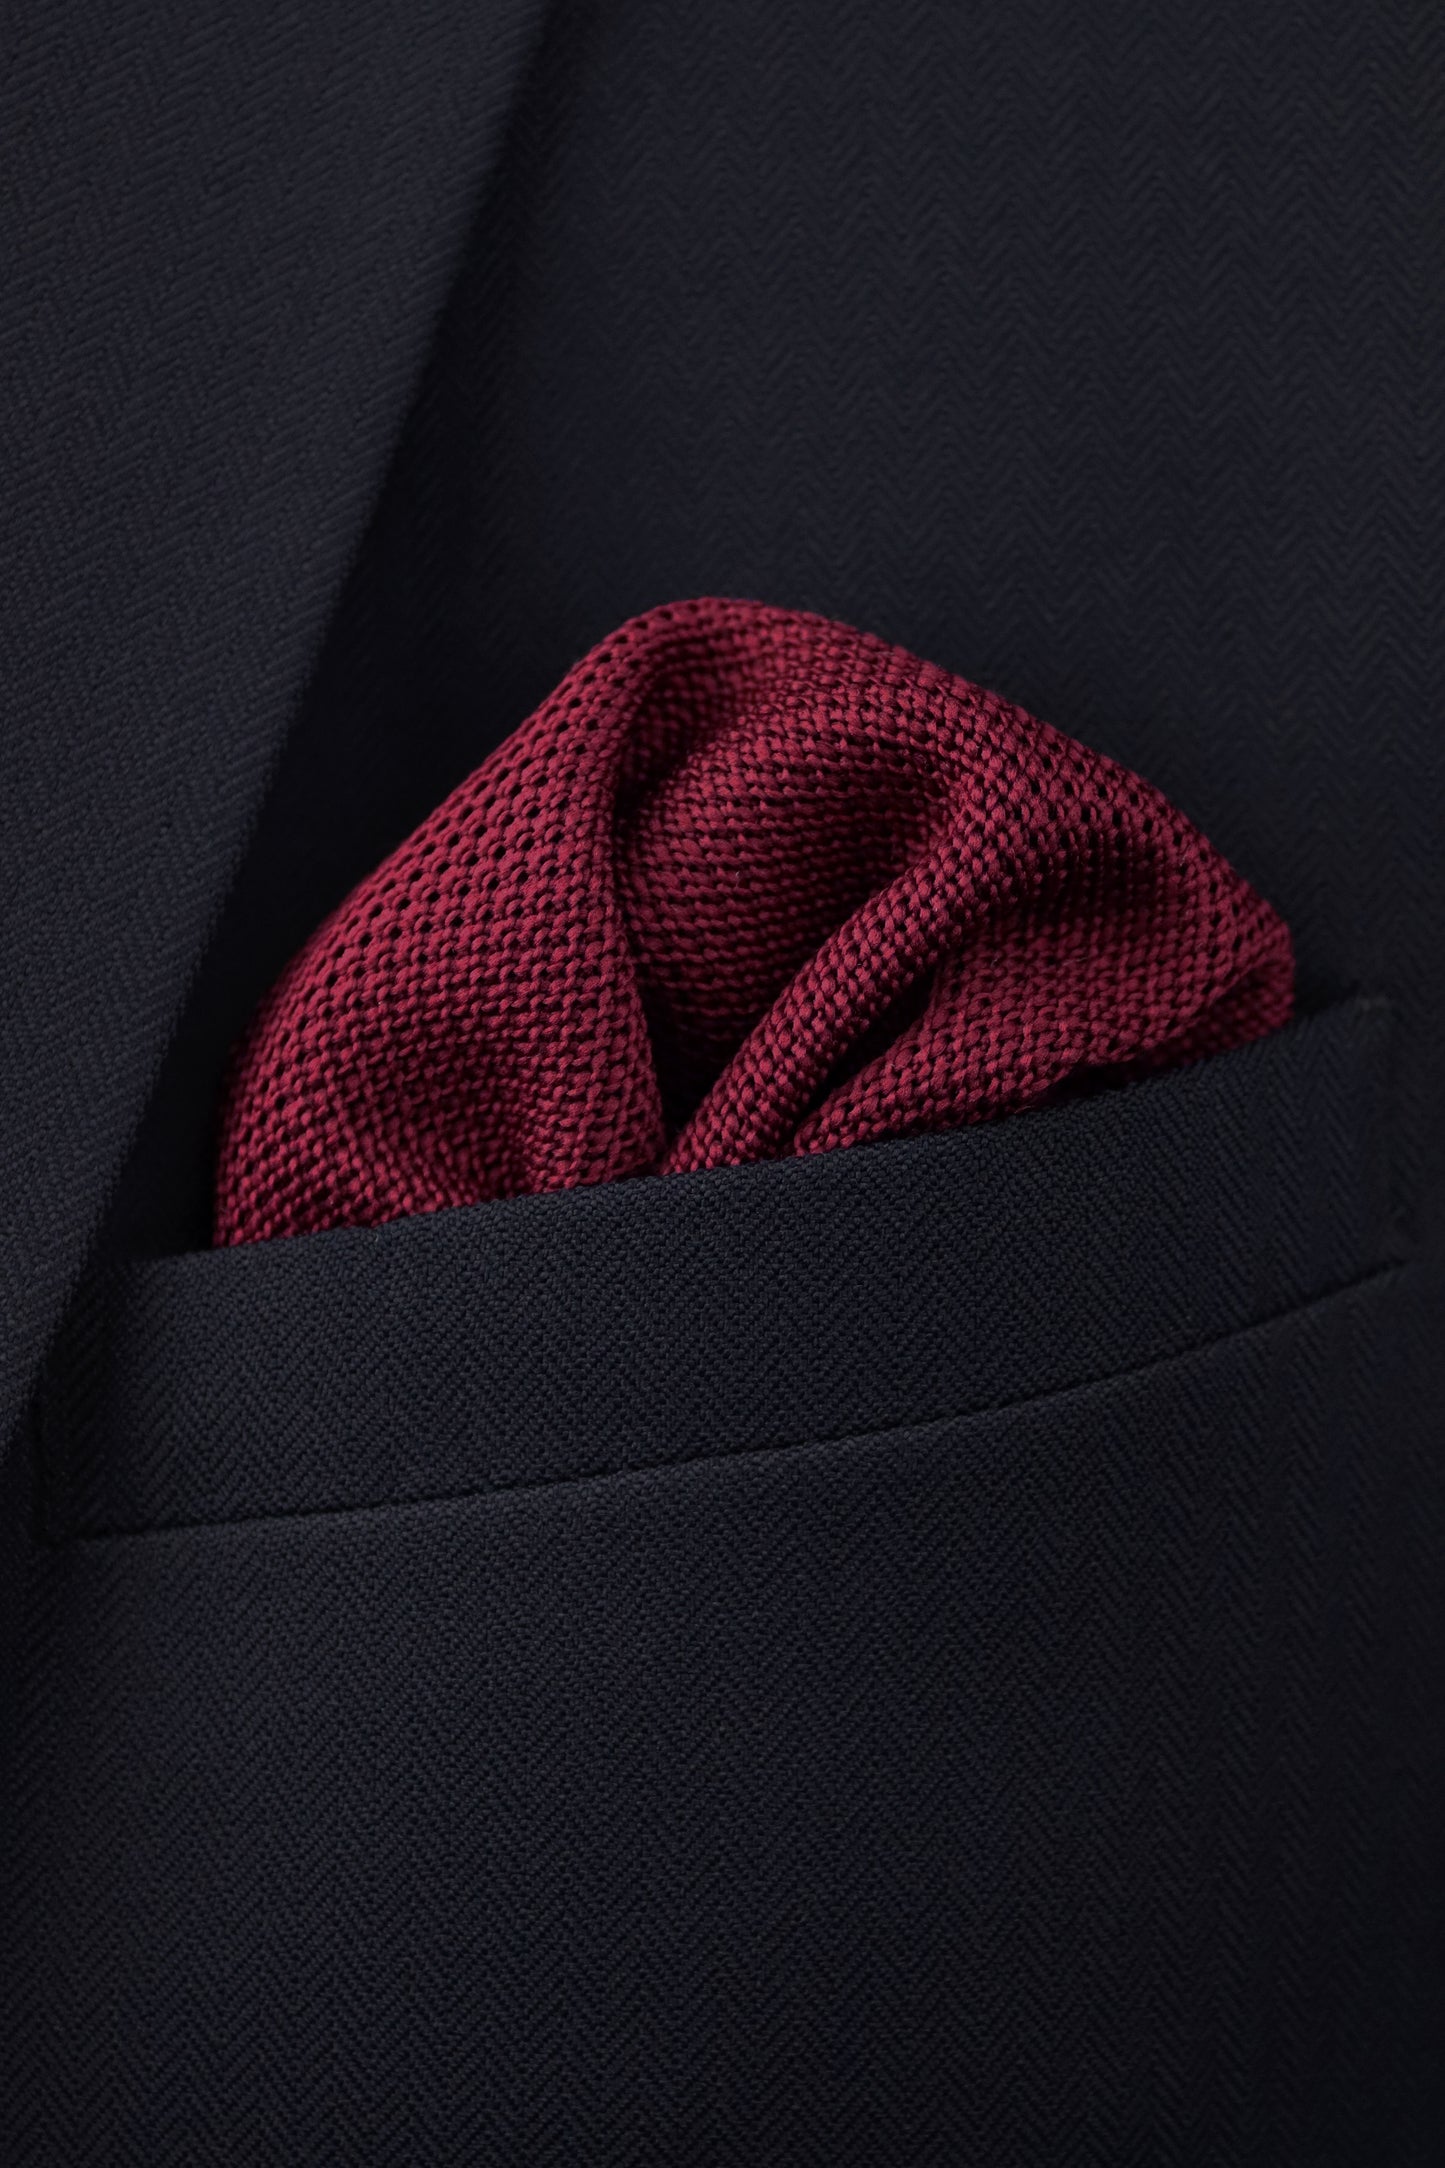 100% Polyester Diamond End Knitted Tie - Burgundy Red